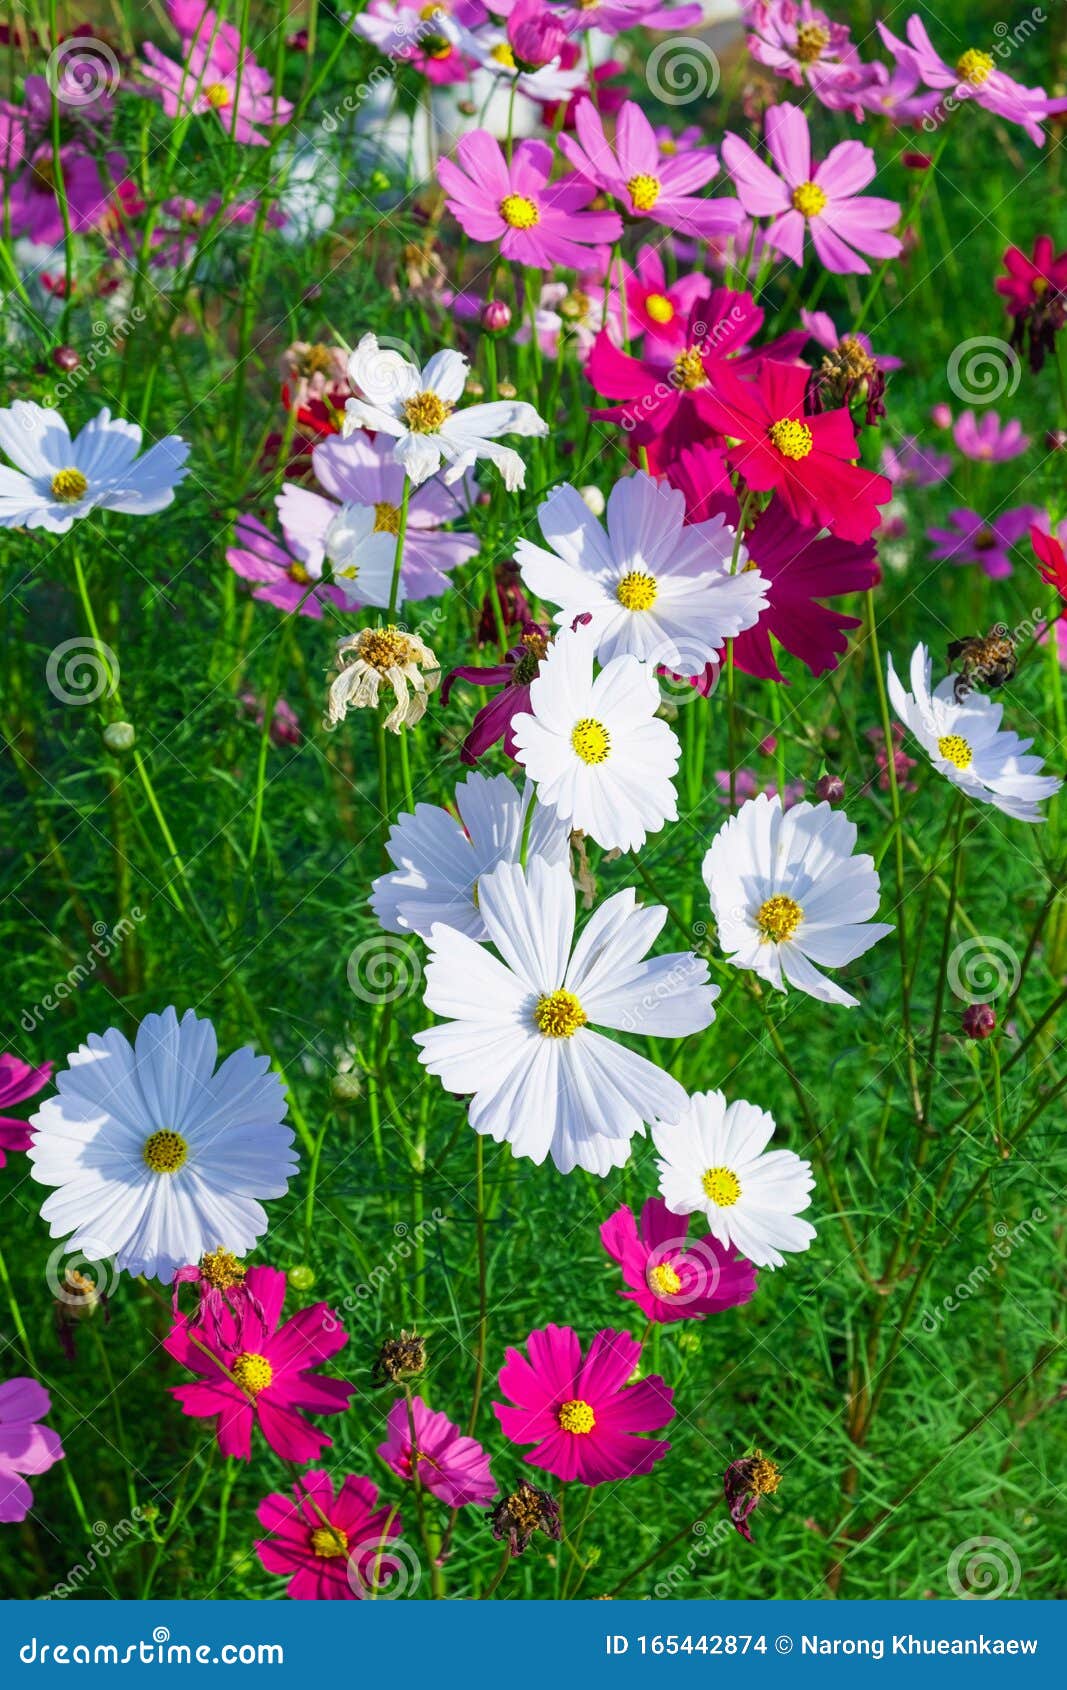 Winter Flower Background and Cosmos Flower Stock Photo - Image of field,  color: 165442874